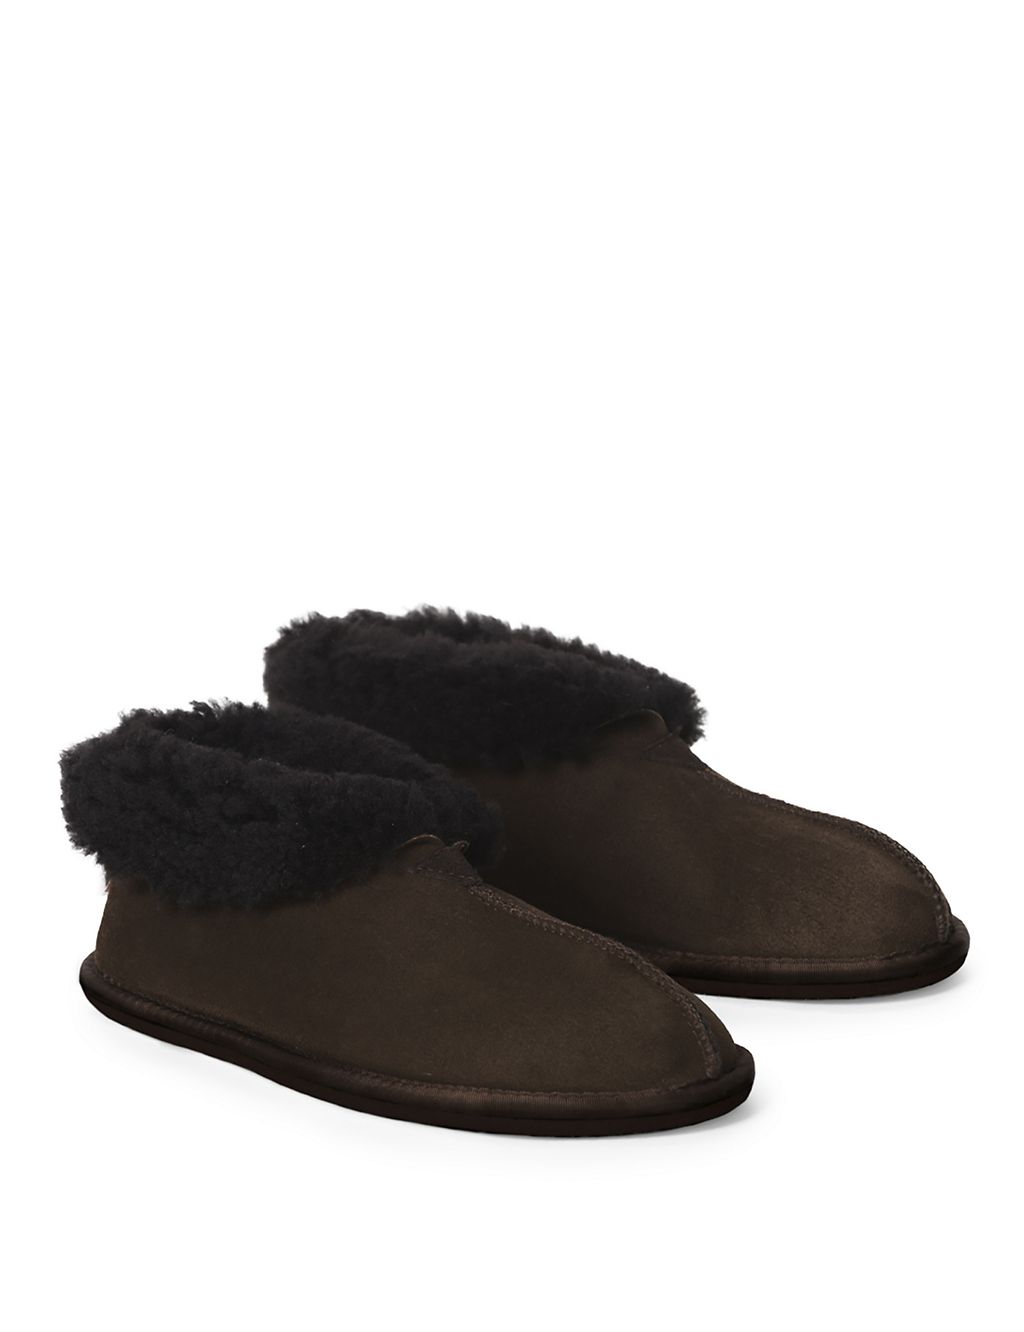 Suede Slipper Boots 3 of 3